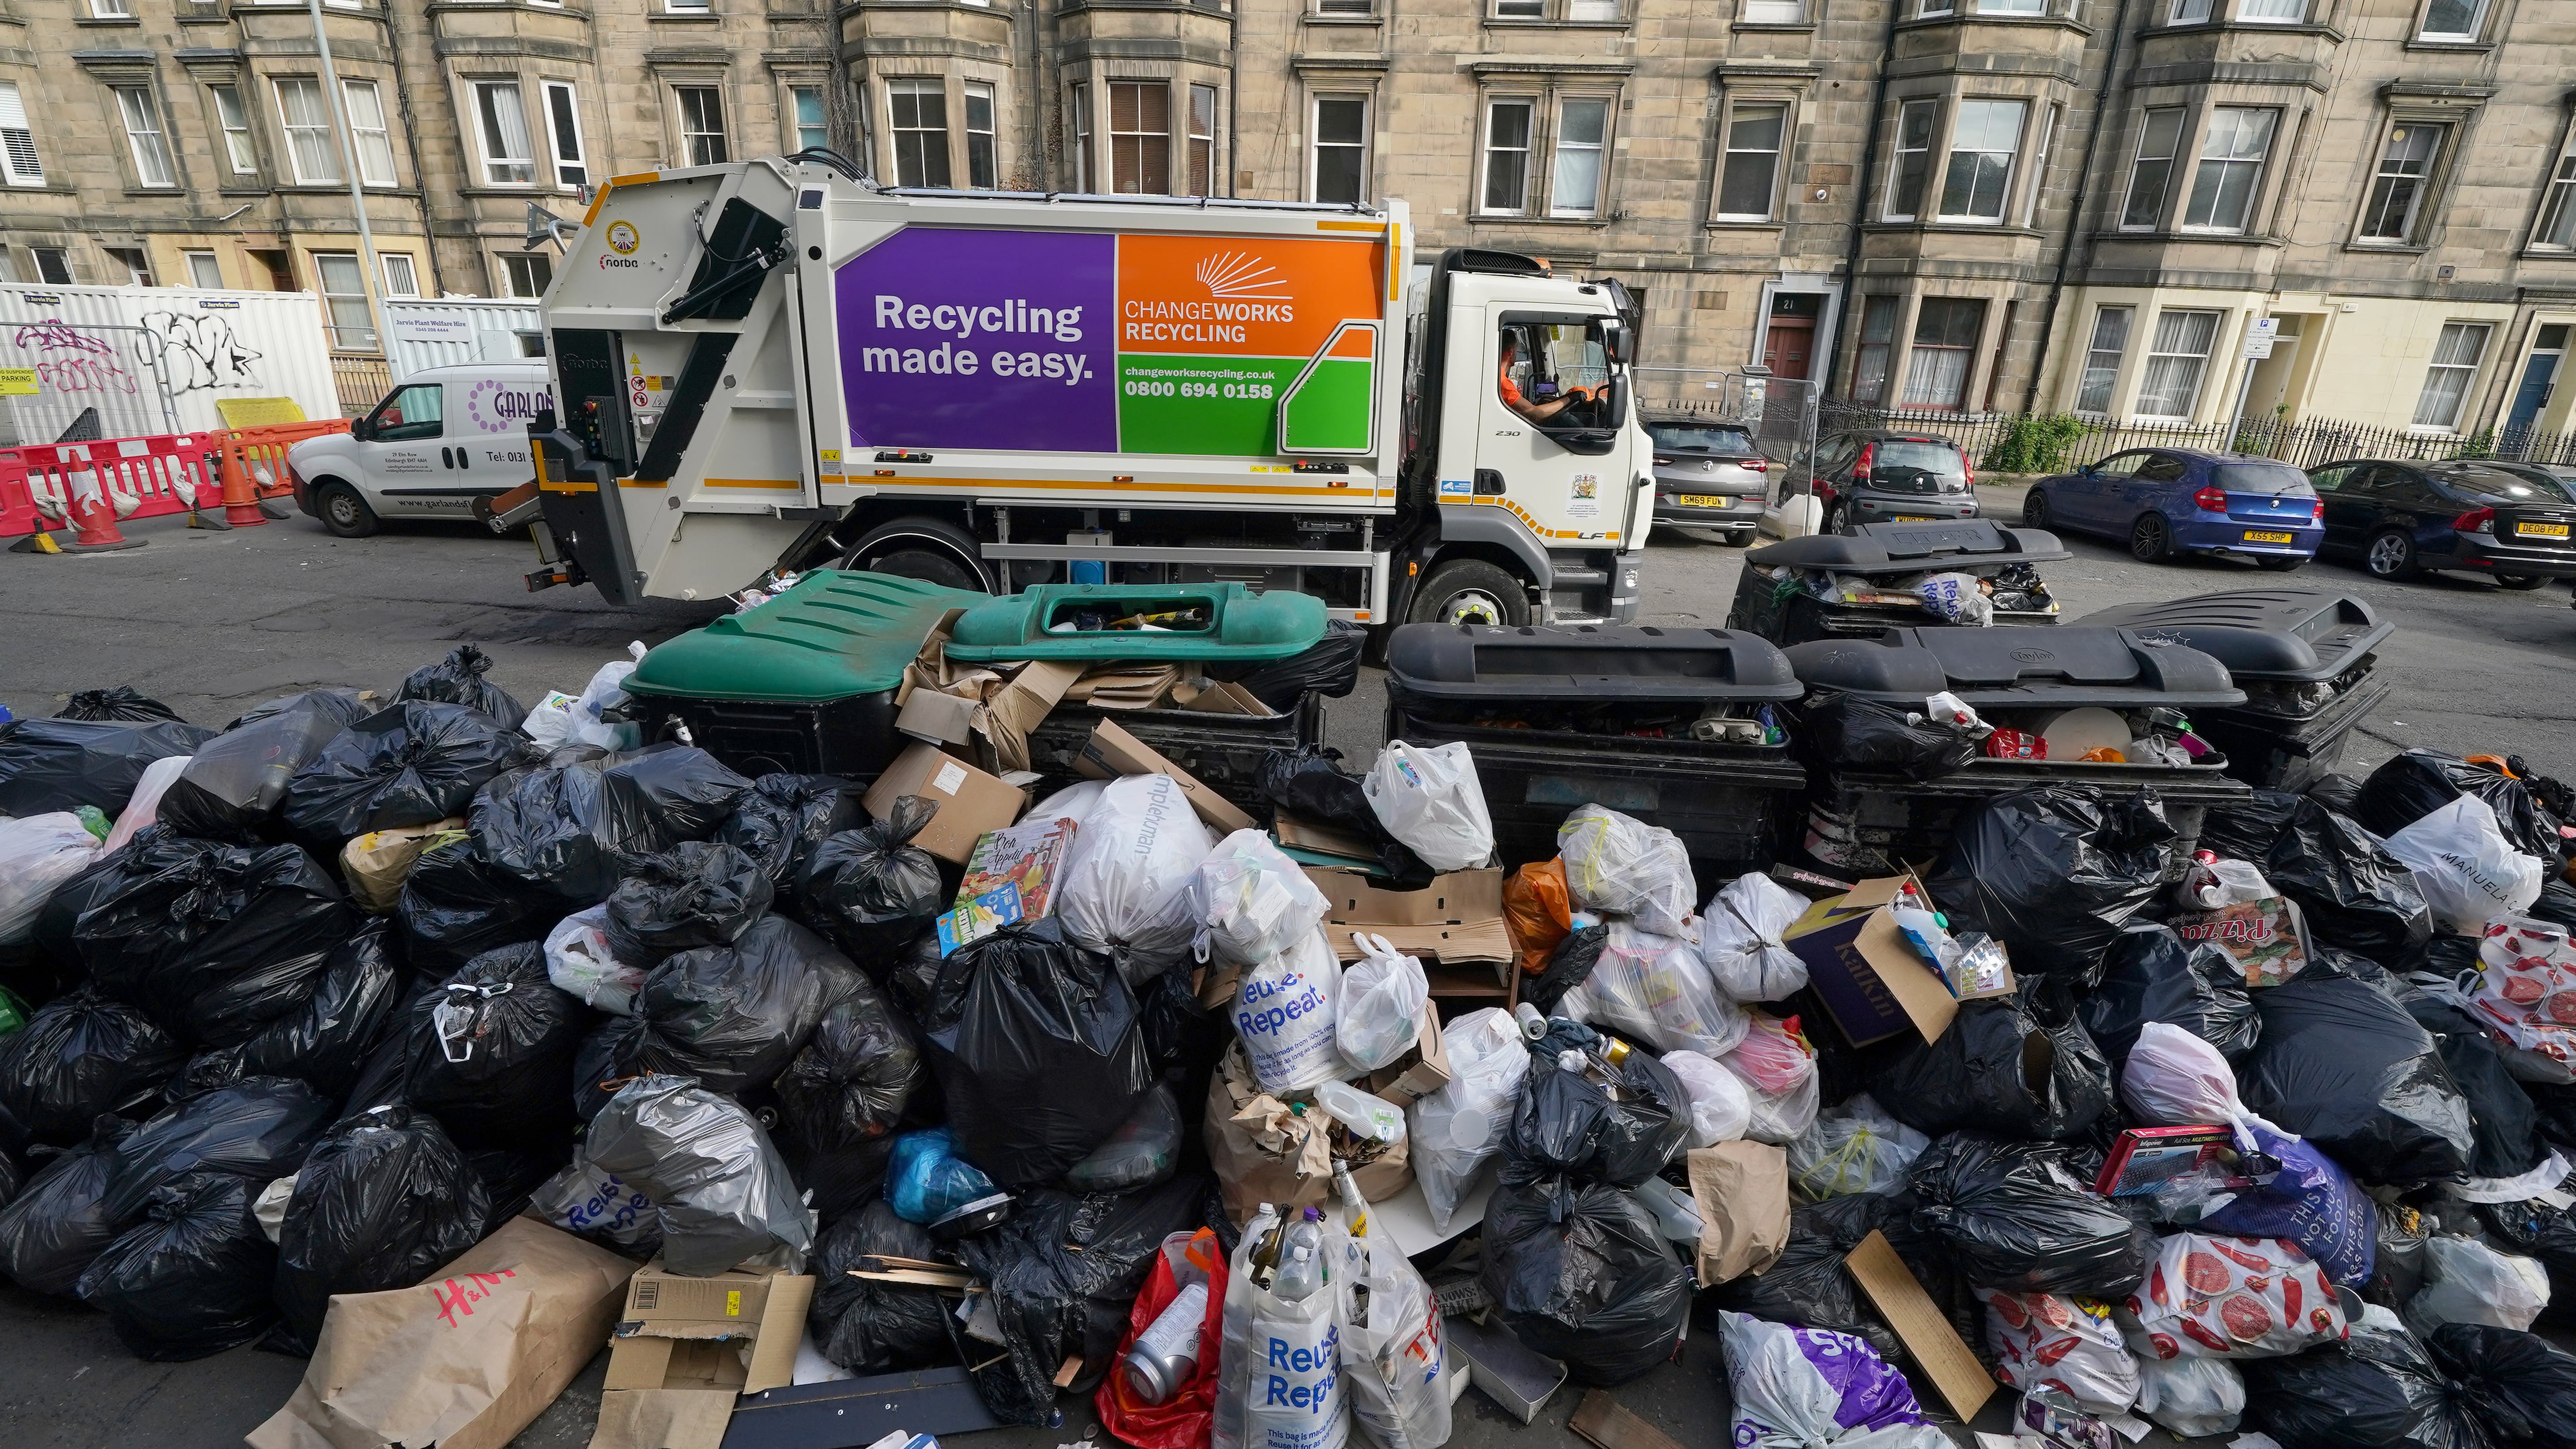 Unions have warned of rubbish could pile up in the streets during planned strikes